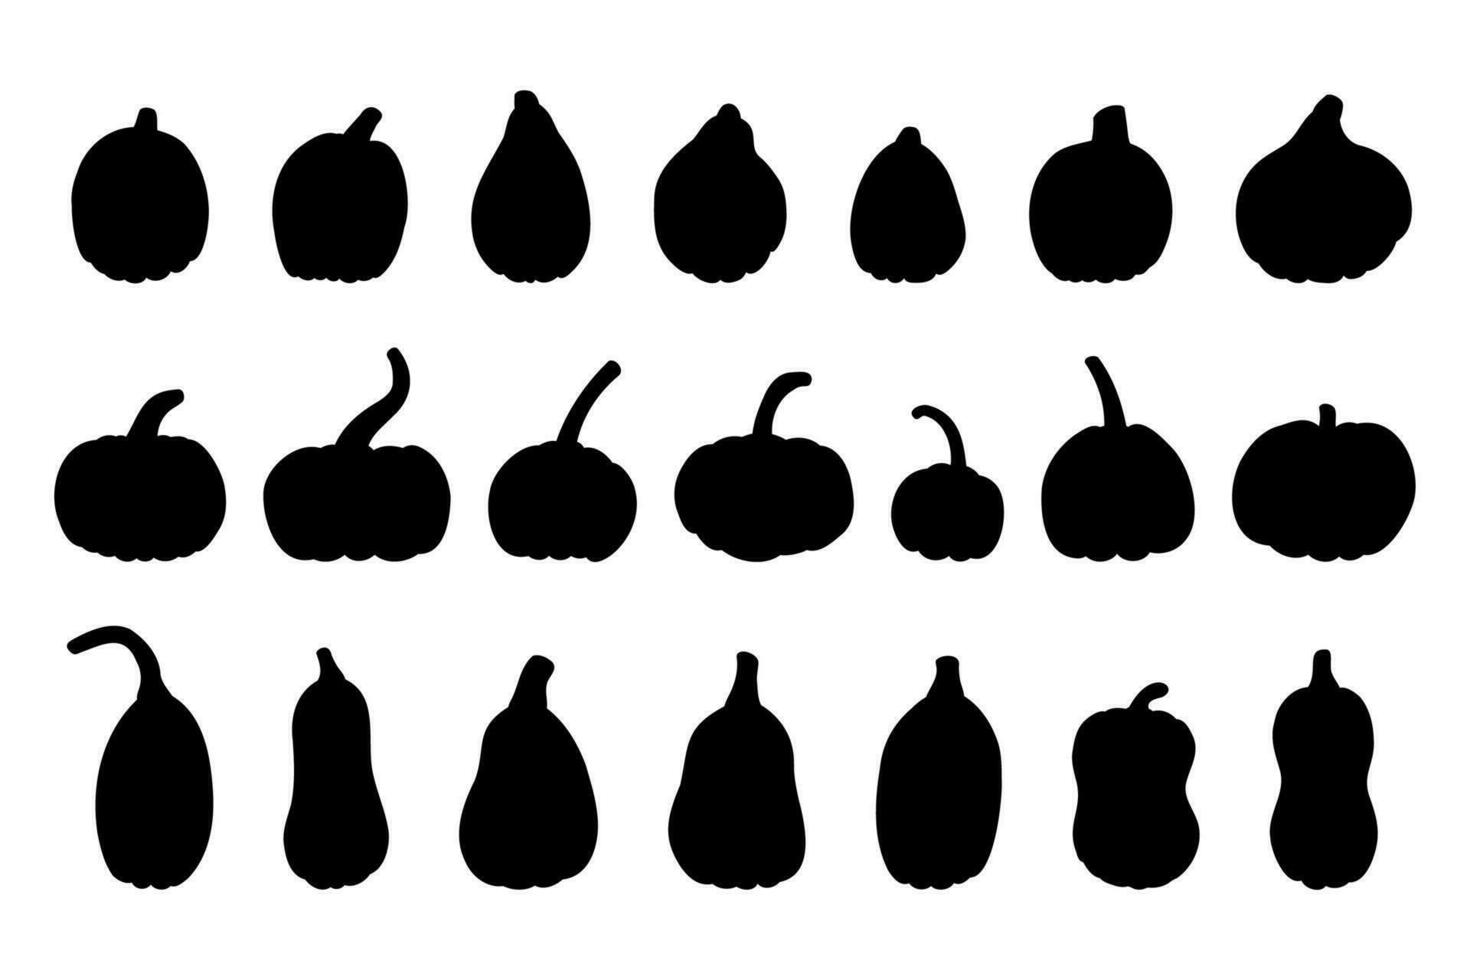 Pumpkin silhouette big set. Isolated vector illustration on white background